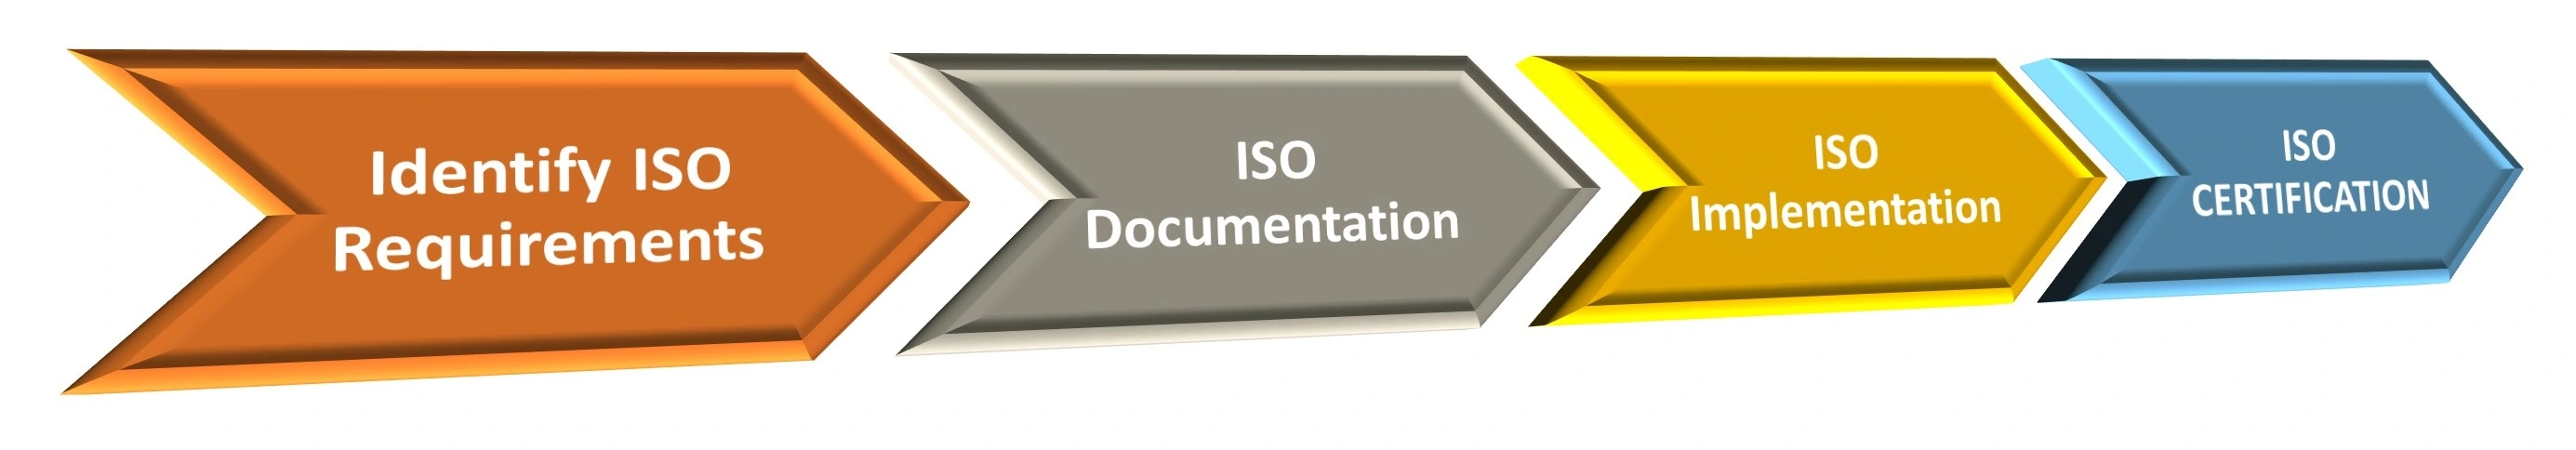 steps in ISO 9001 certification